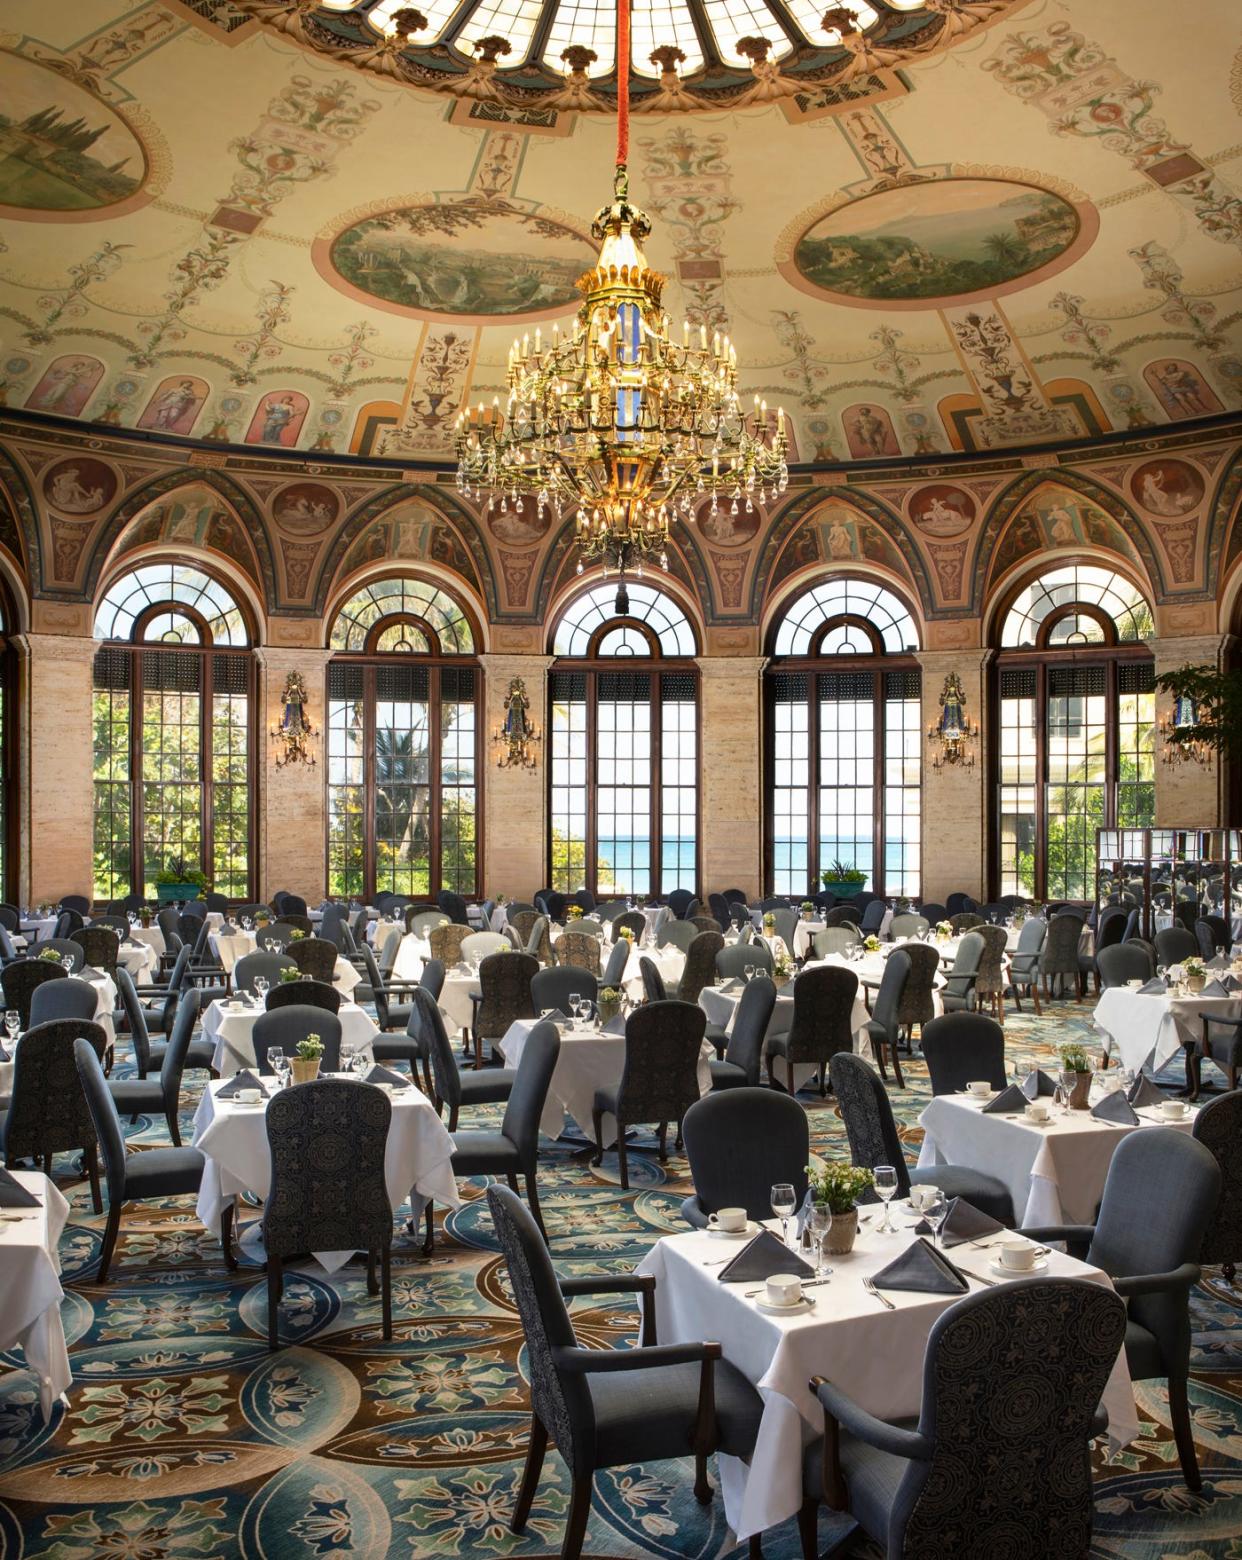 Mother’s Day reservations for The Breakers Circle dining room have reached capacity, but a wait list is being taken. The nearby Ponce de Leon Ballroom also will offer a brunch buffet.